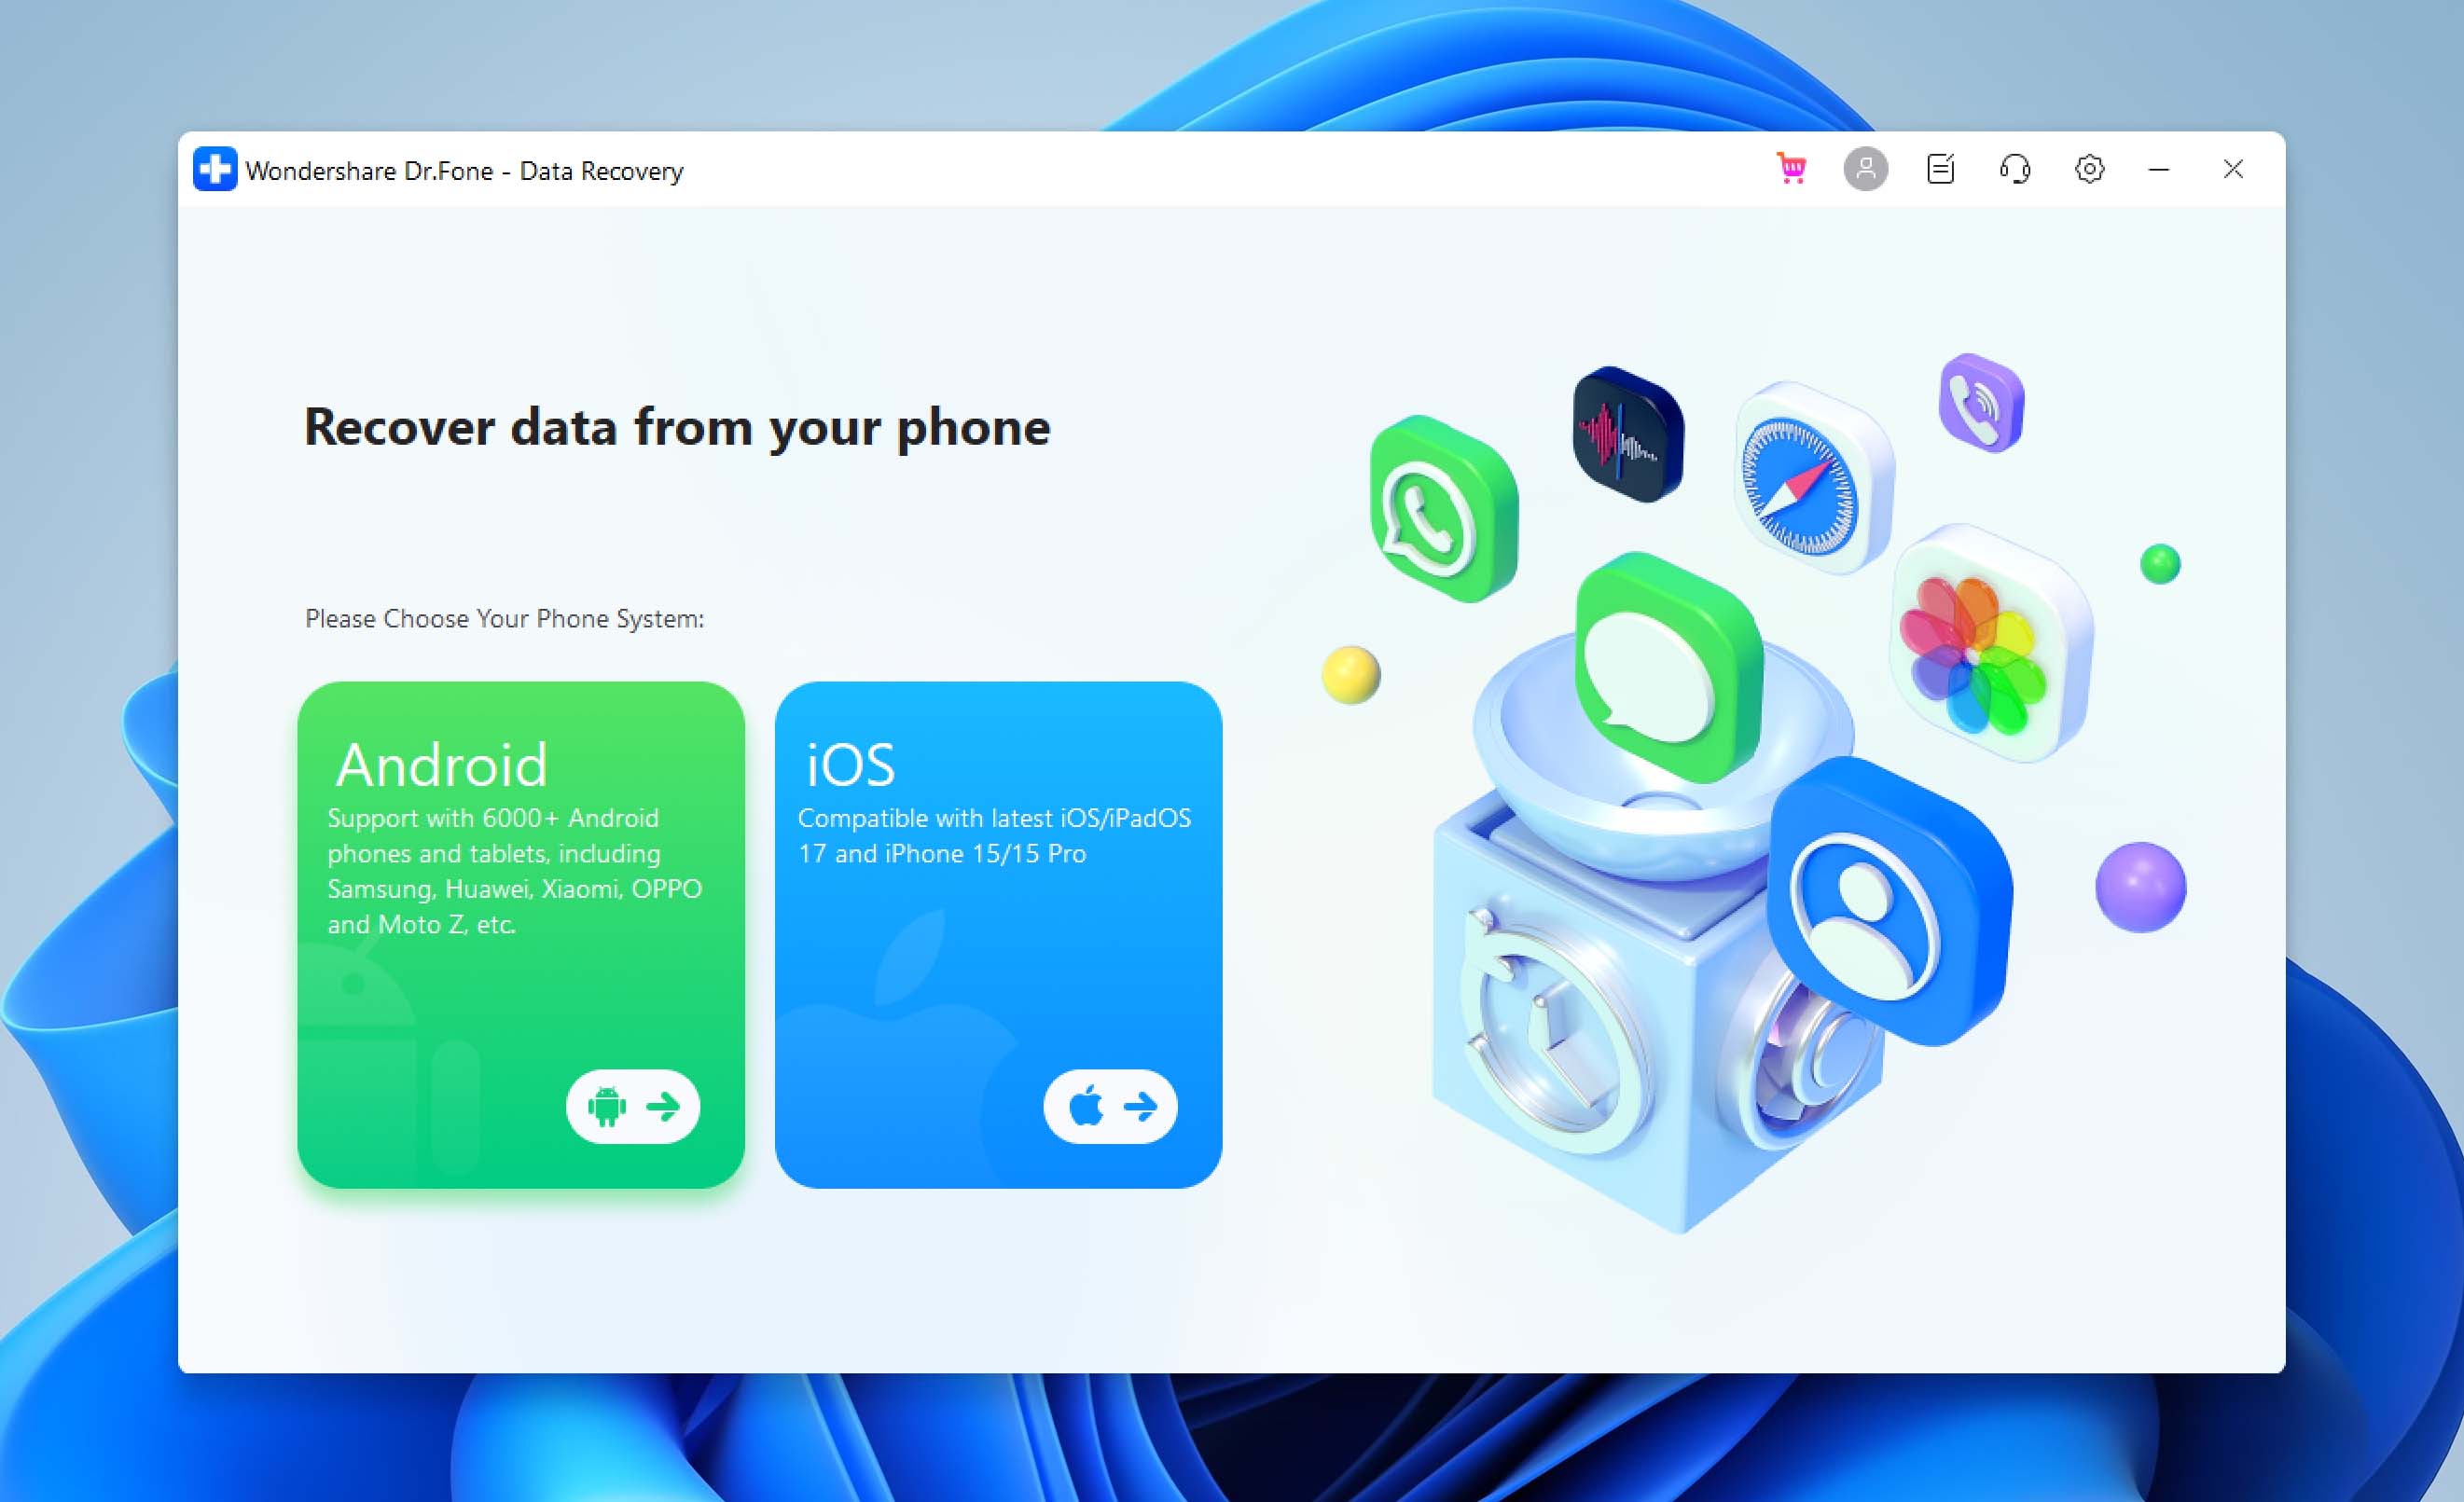 Launch dr.fone and choose the iOS data recovery option